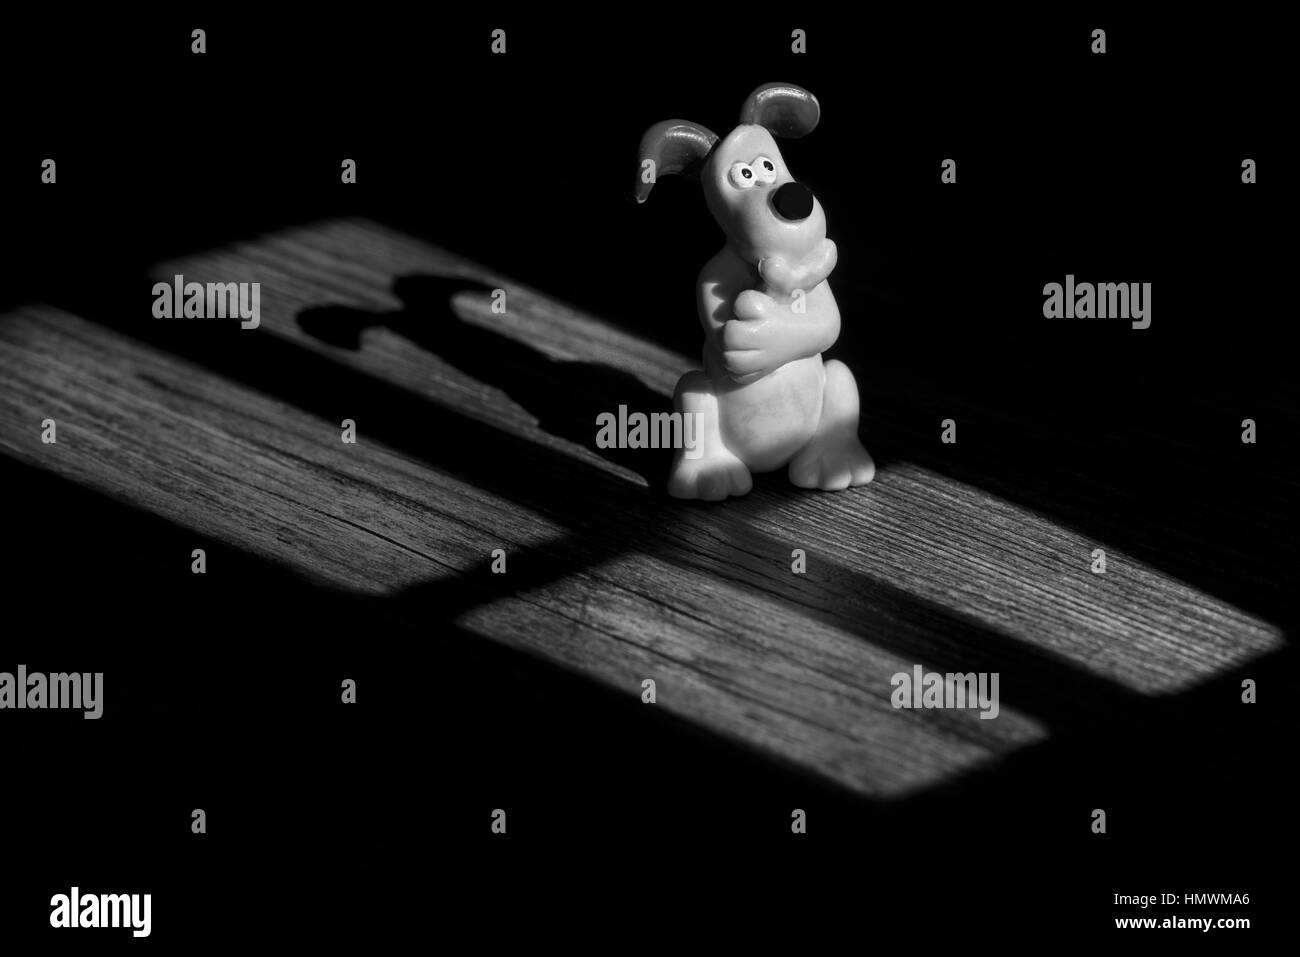 Gromit Deep in thought lit by moonlight.    I cut four rectangles into a piece of black card. I then shone a spot light torch through the card to give Stock Photo